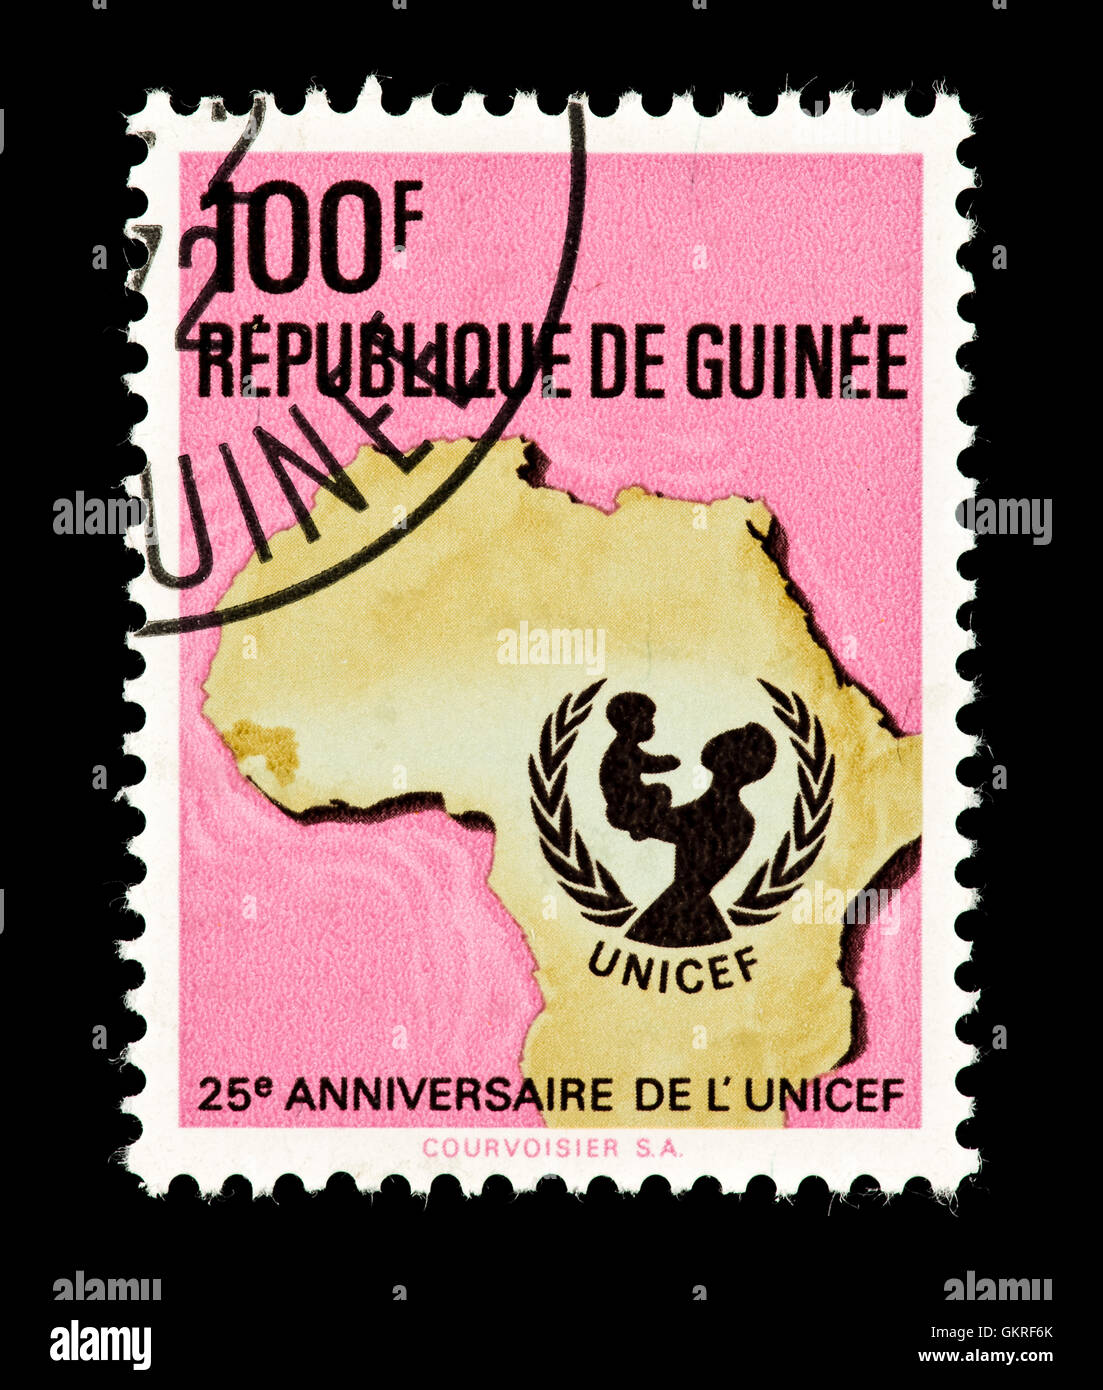 Postage stamp from Guinea depicting a map of Africa issued for the 25,th anniversary of UNICEF. Stock Photo